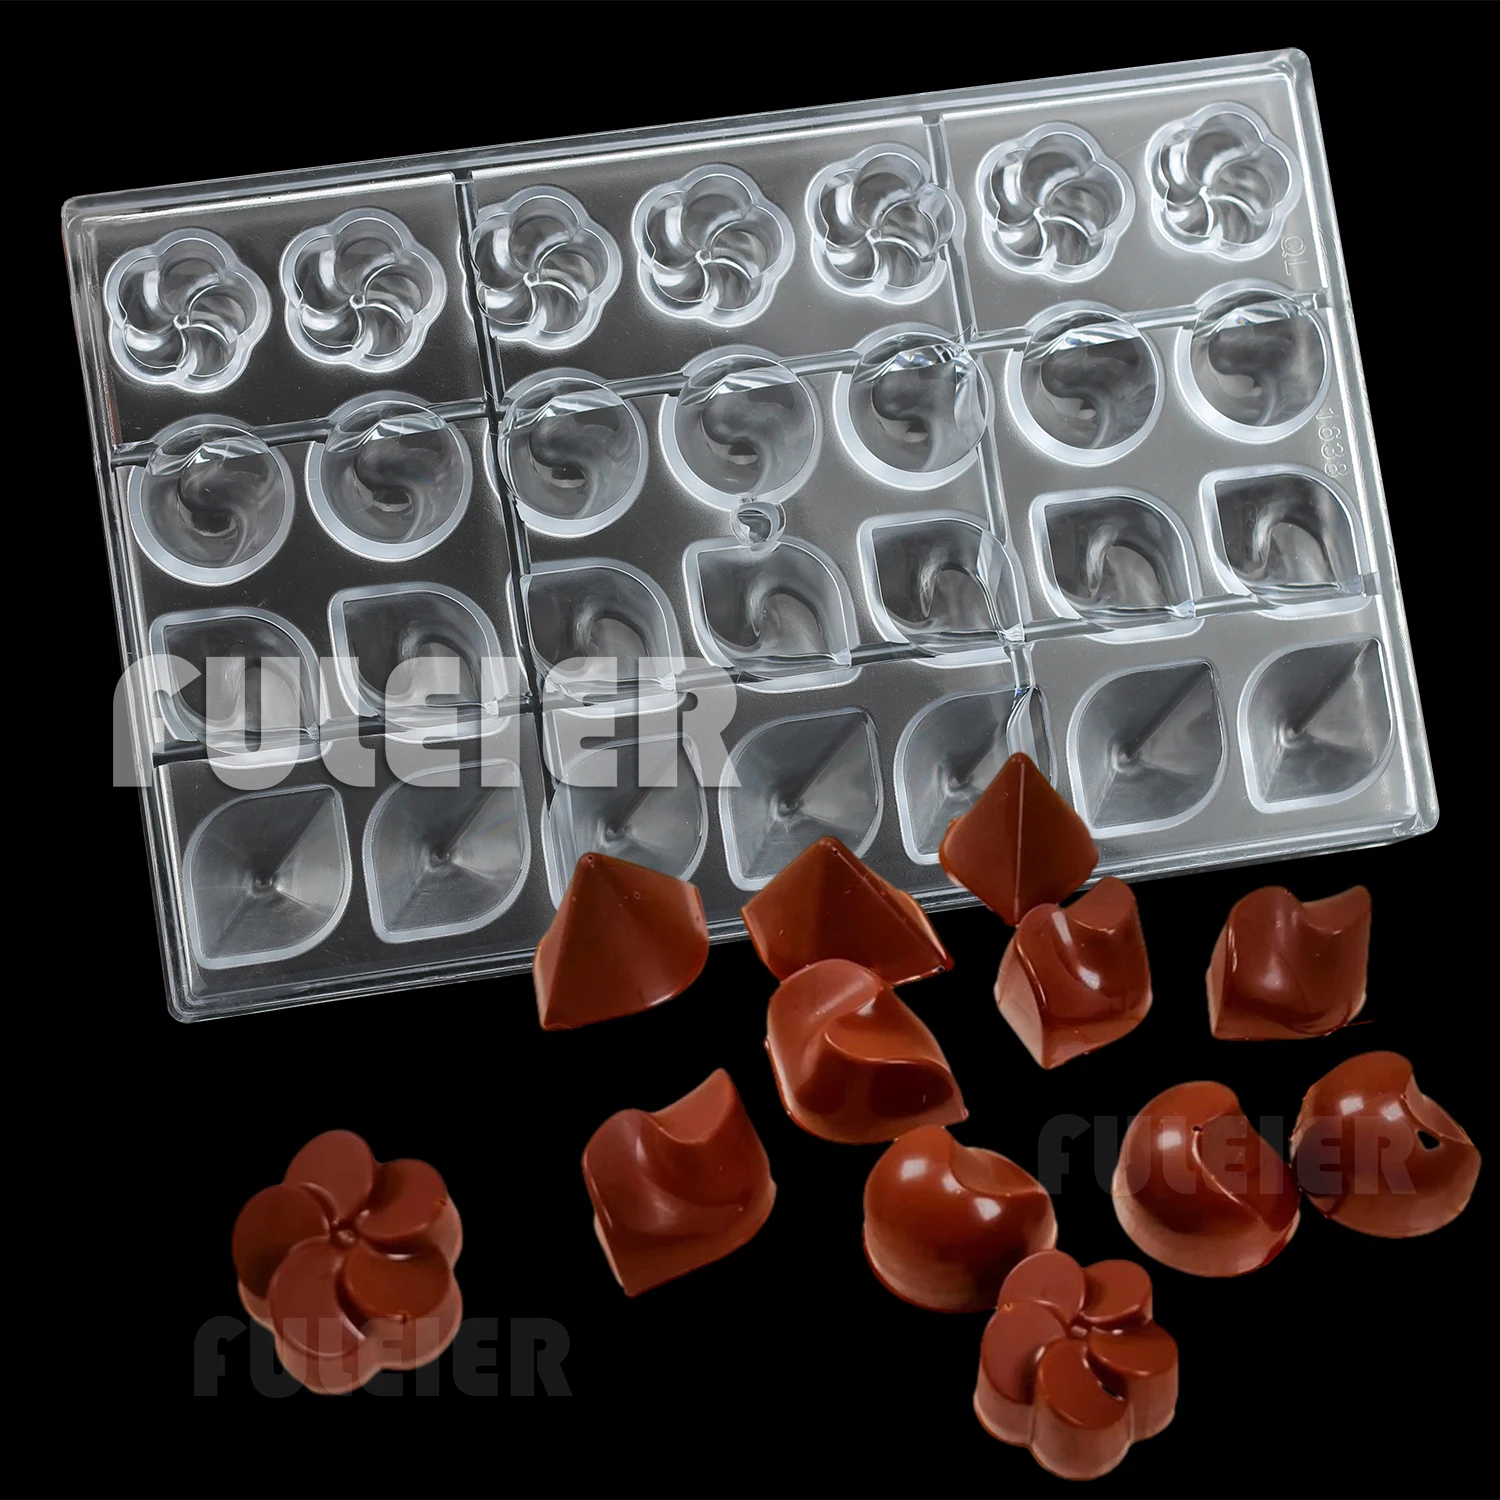 

4 Shapes Polycarbonate Chocolate Mold Baking Bonbons Candy Mould Cake Confectionery Tool baking Candy Mold